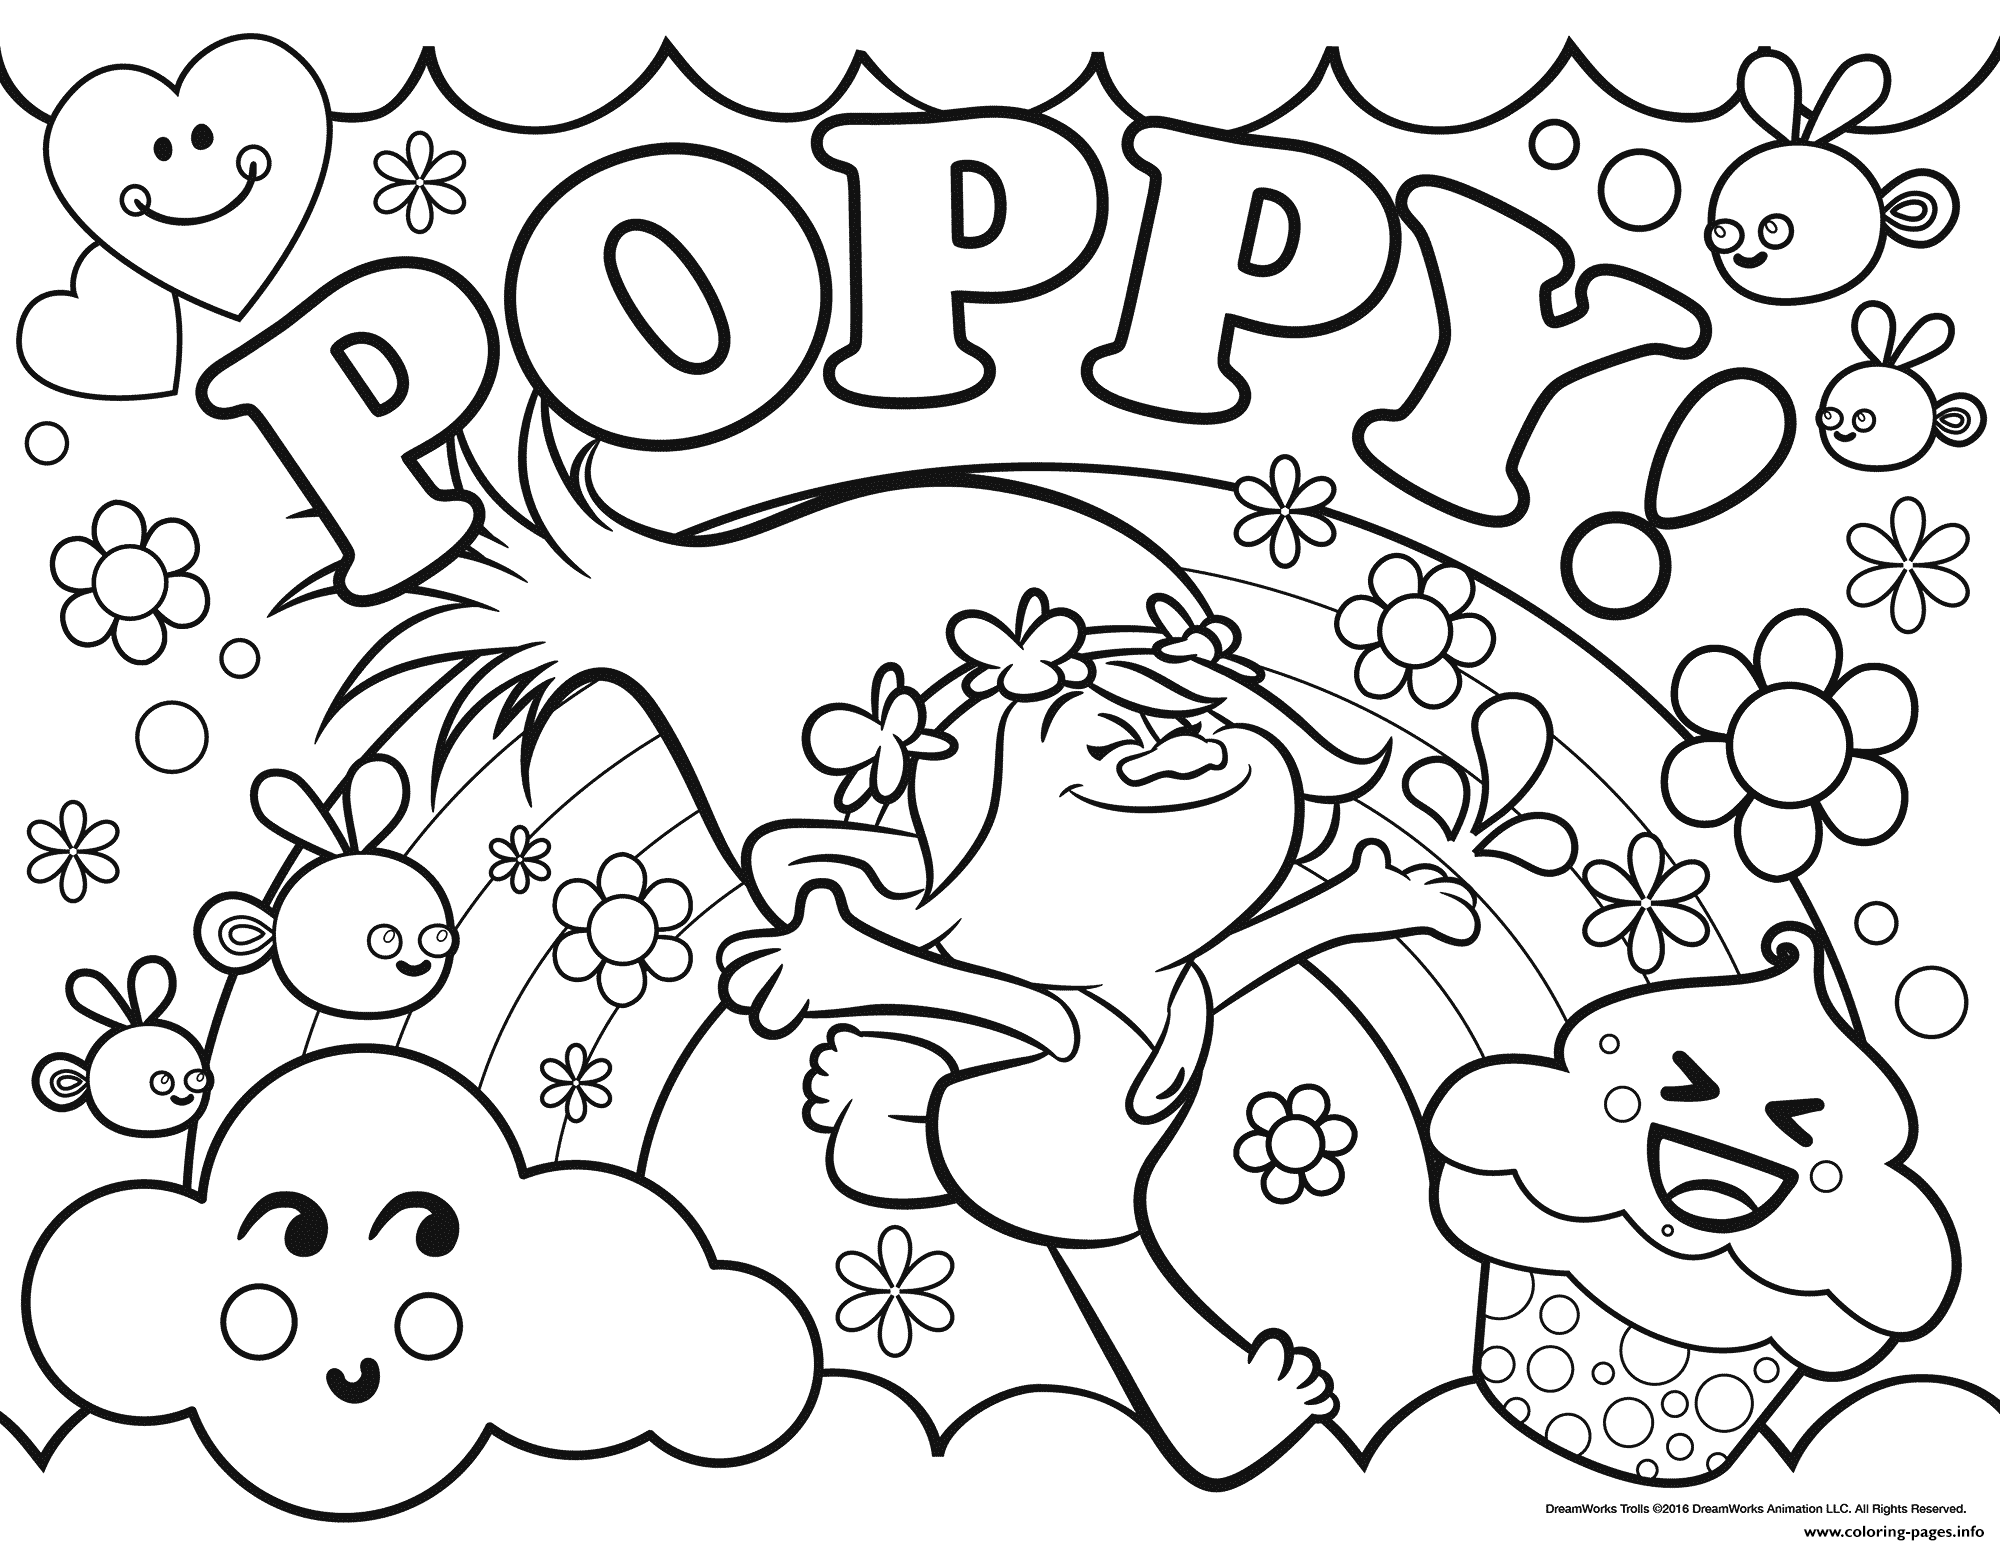 Trolls Poppy Coloring Pages Printable